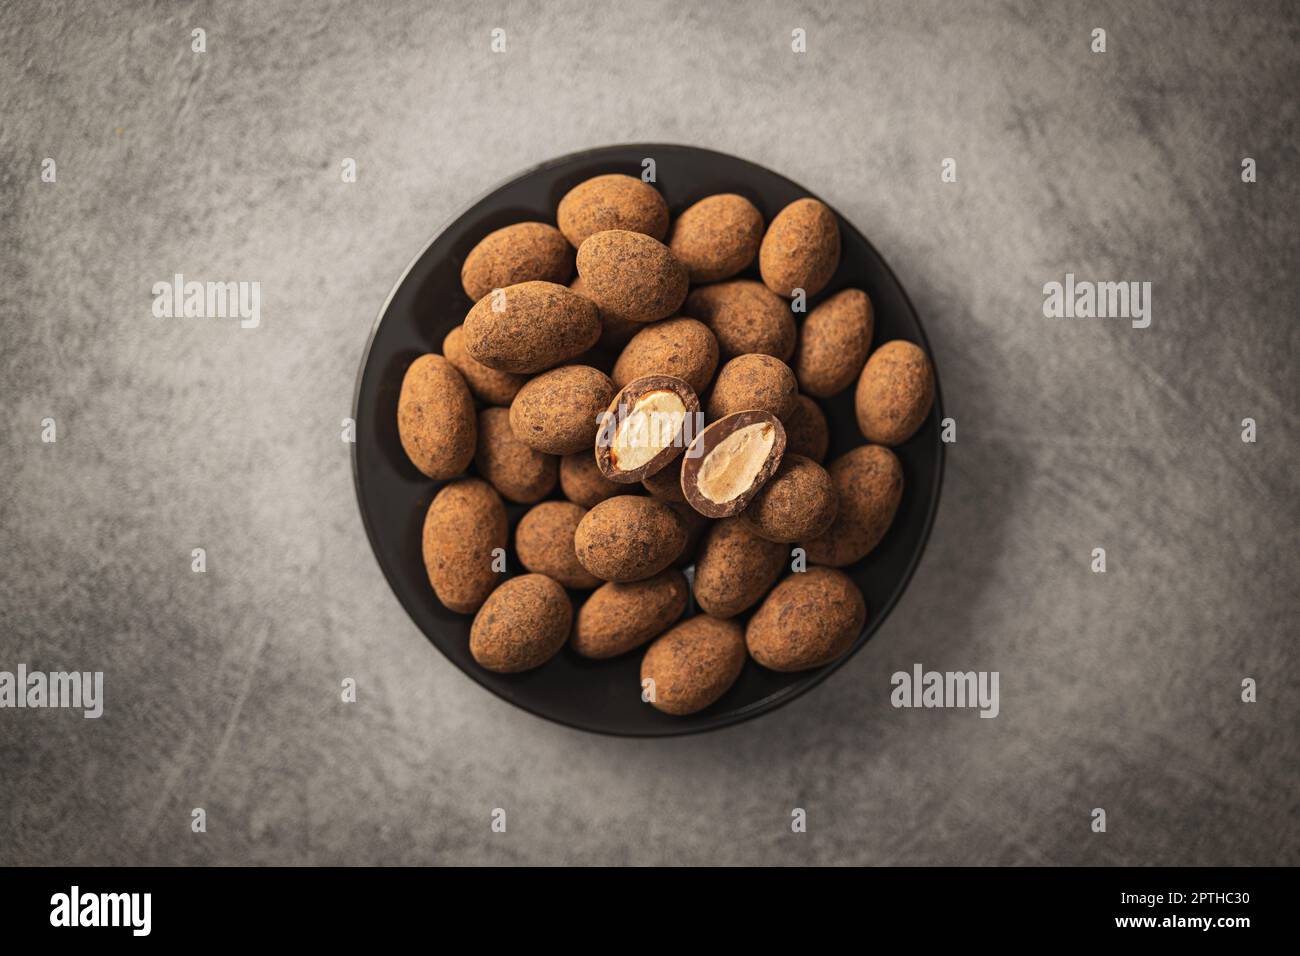 Almonds in chocolate coated in cocoa in bowl on a dark table. Top view. Stock Photo